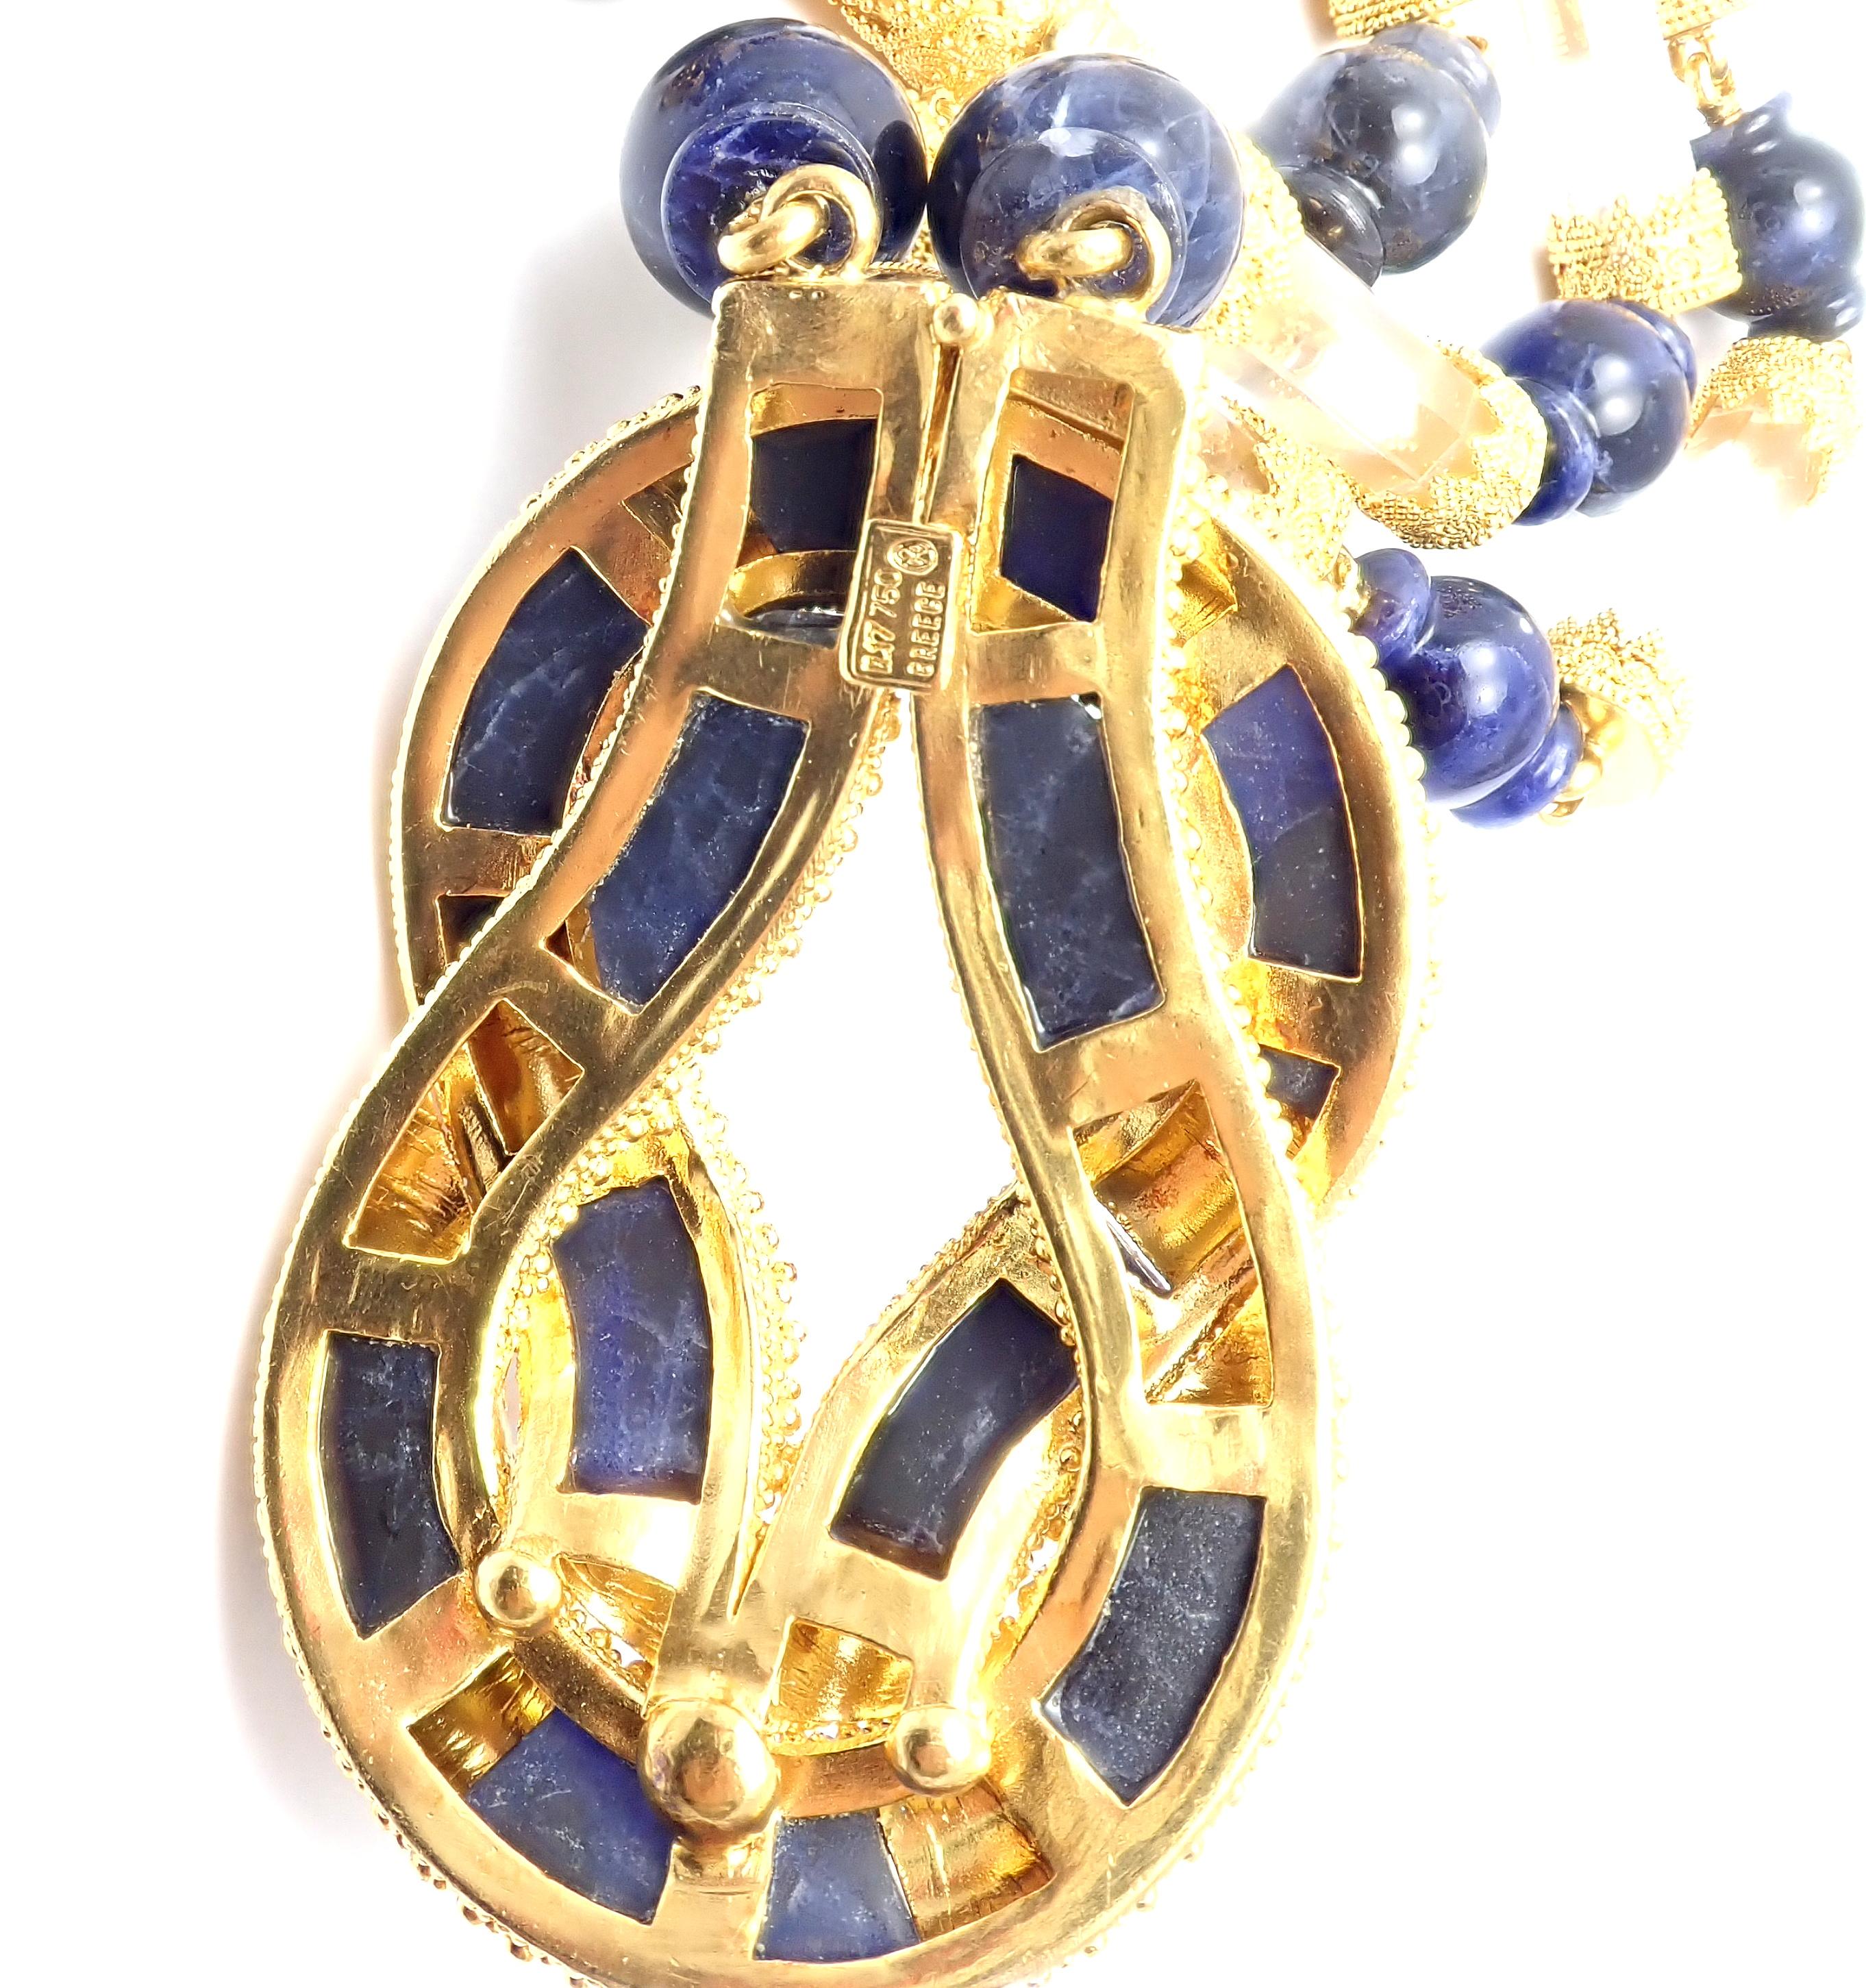 18k Yellow Gold Sodalite Rock Crystal Hercules Knot Necklace By Illias Lalaounis.
Details:
Length: 30